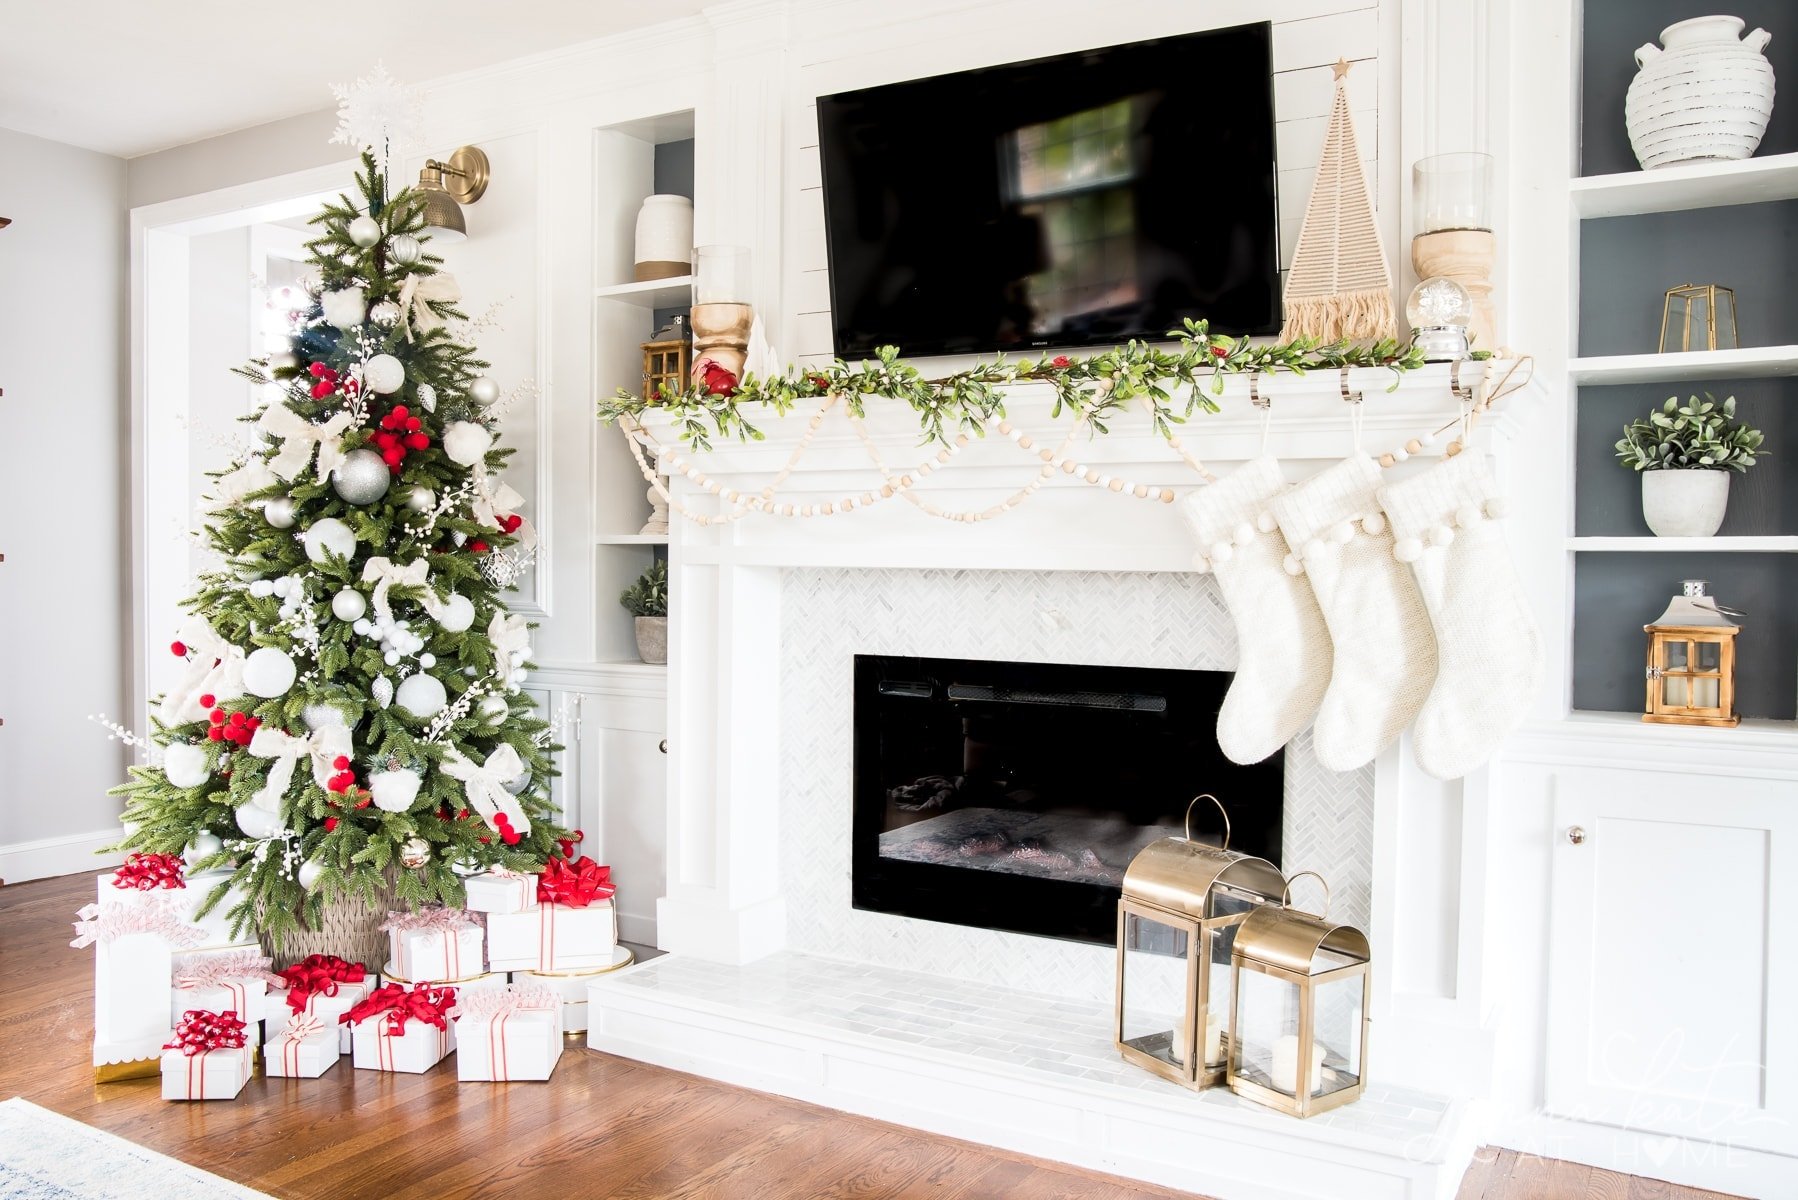 How to decorate a Christmas mantel with a TV above it